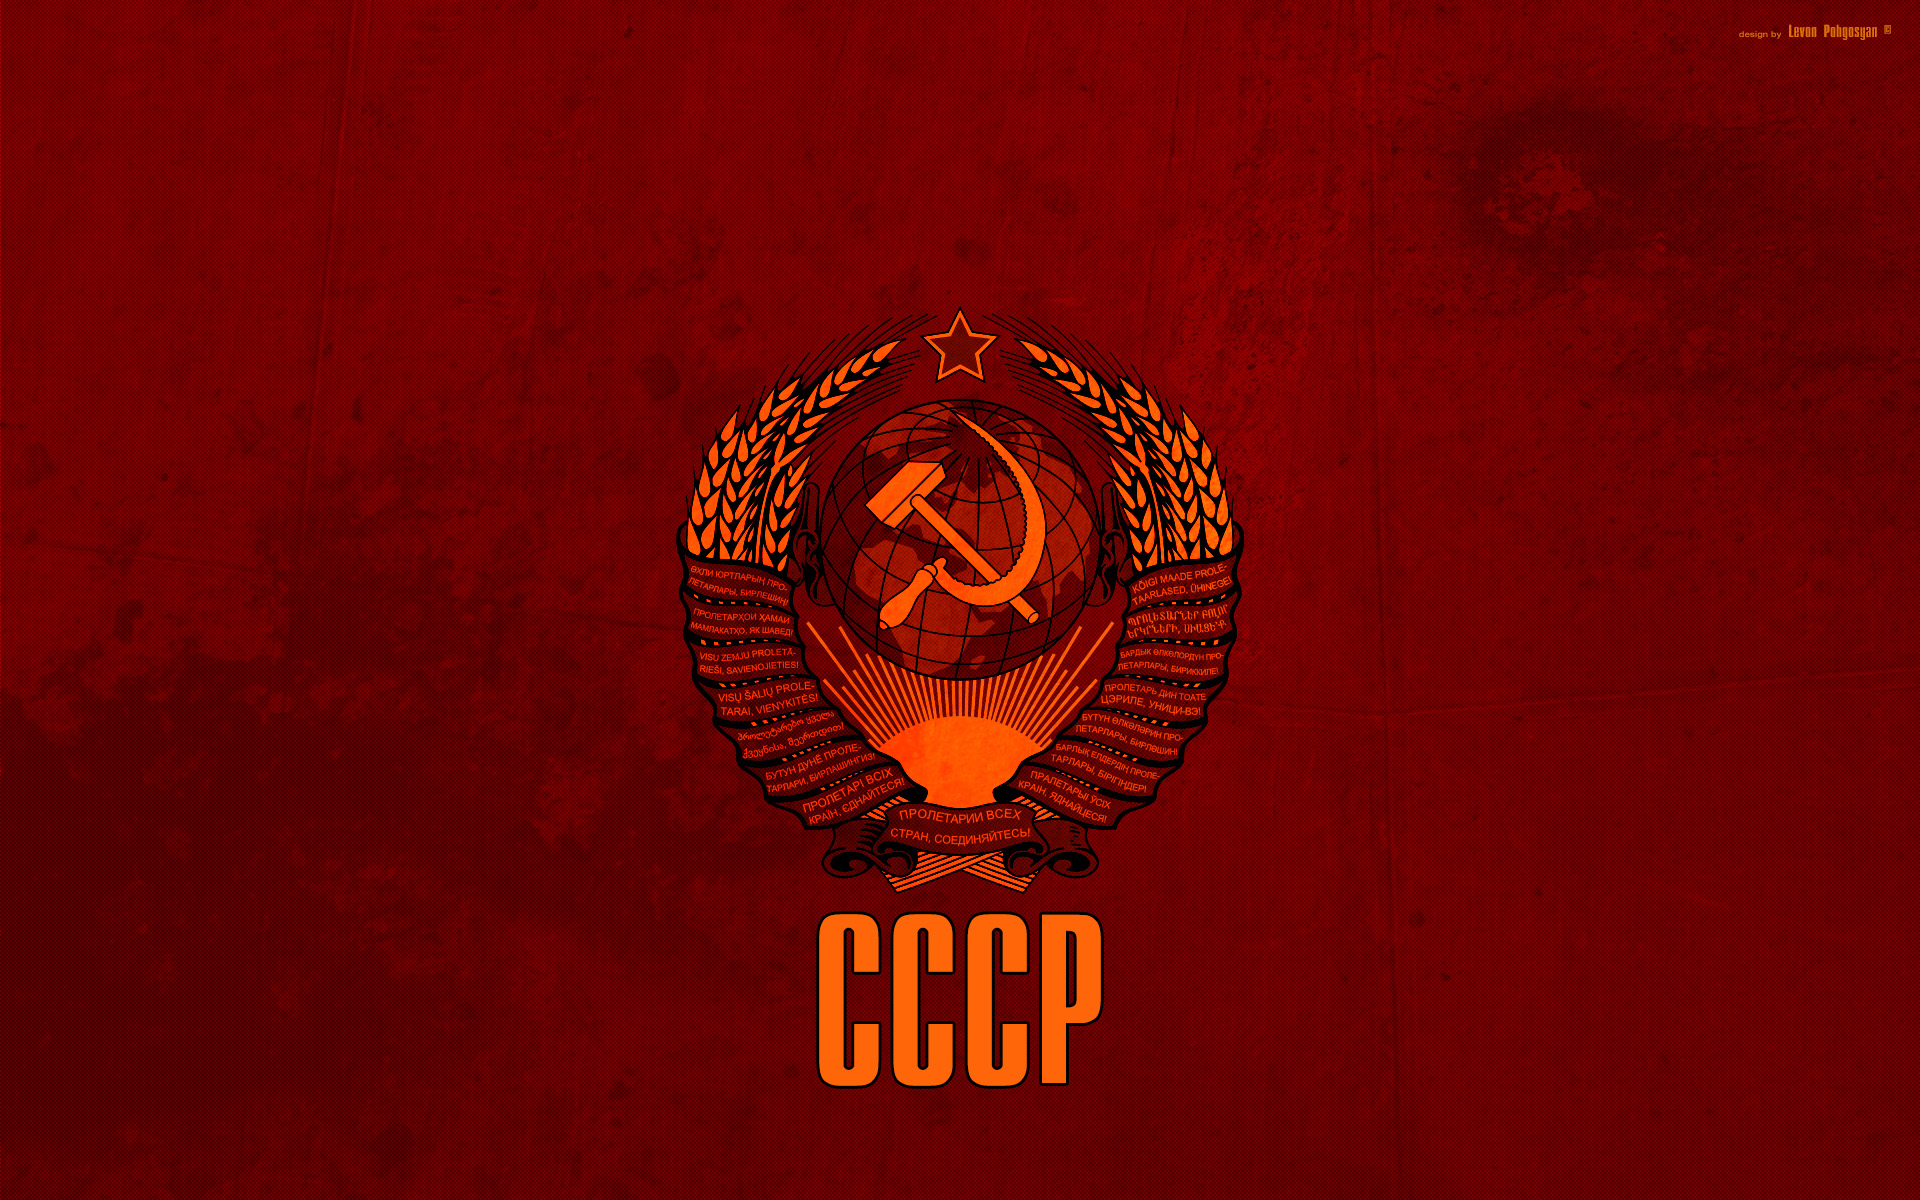 Cccp Wallpaper By Dalevtwins